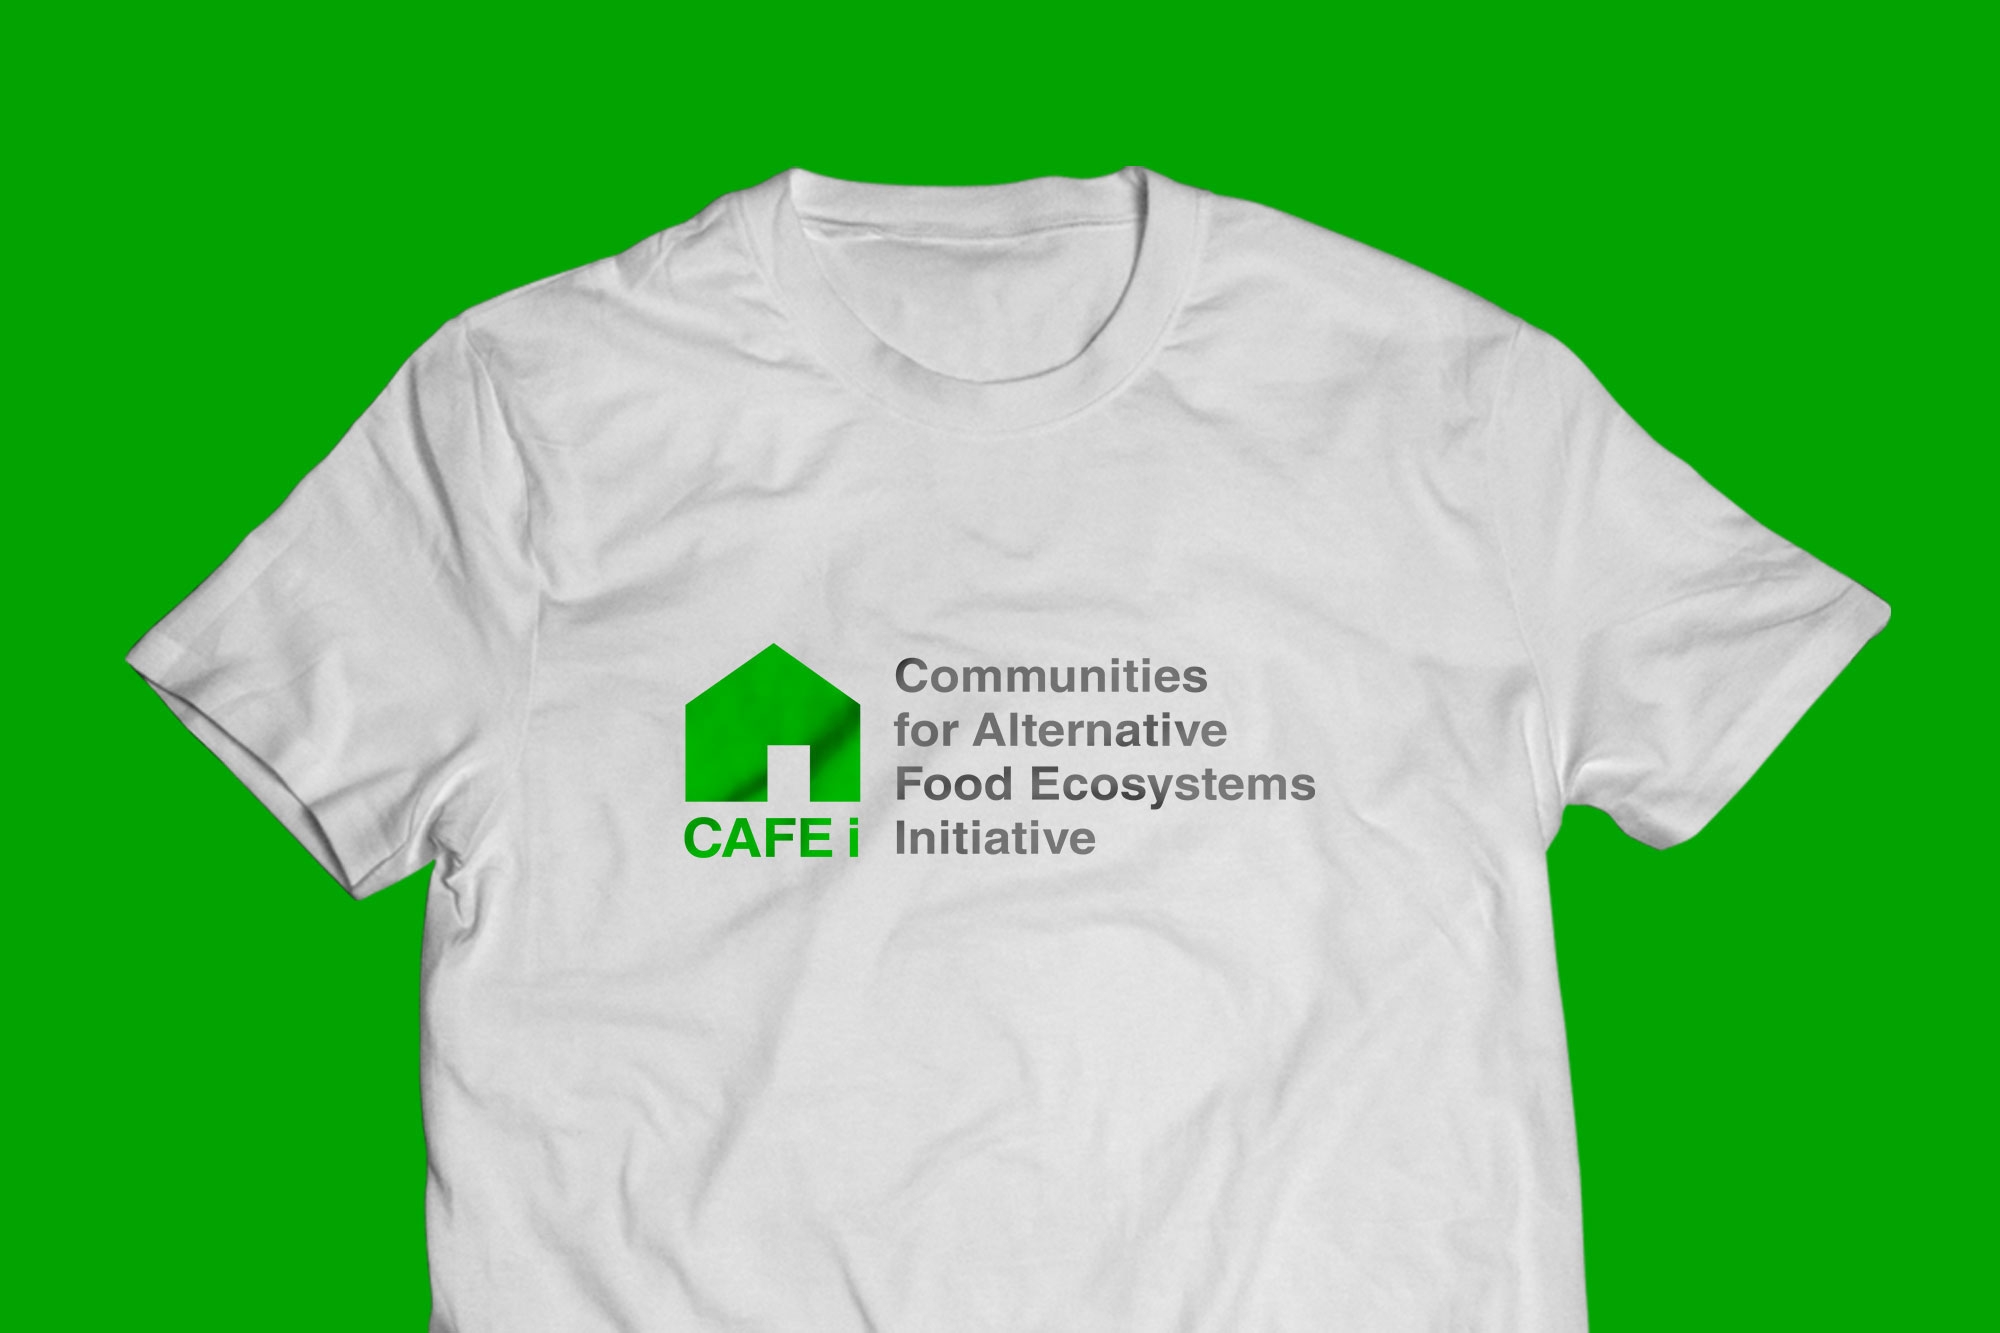  Communities for Alternative Food Ecosystems Initiative (CAFEi) 